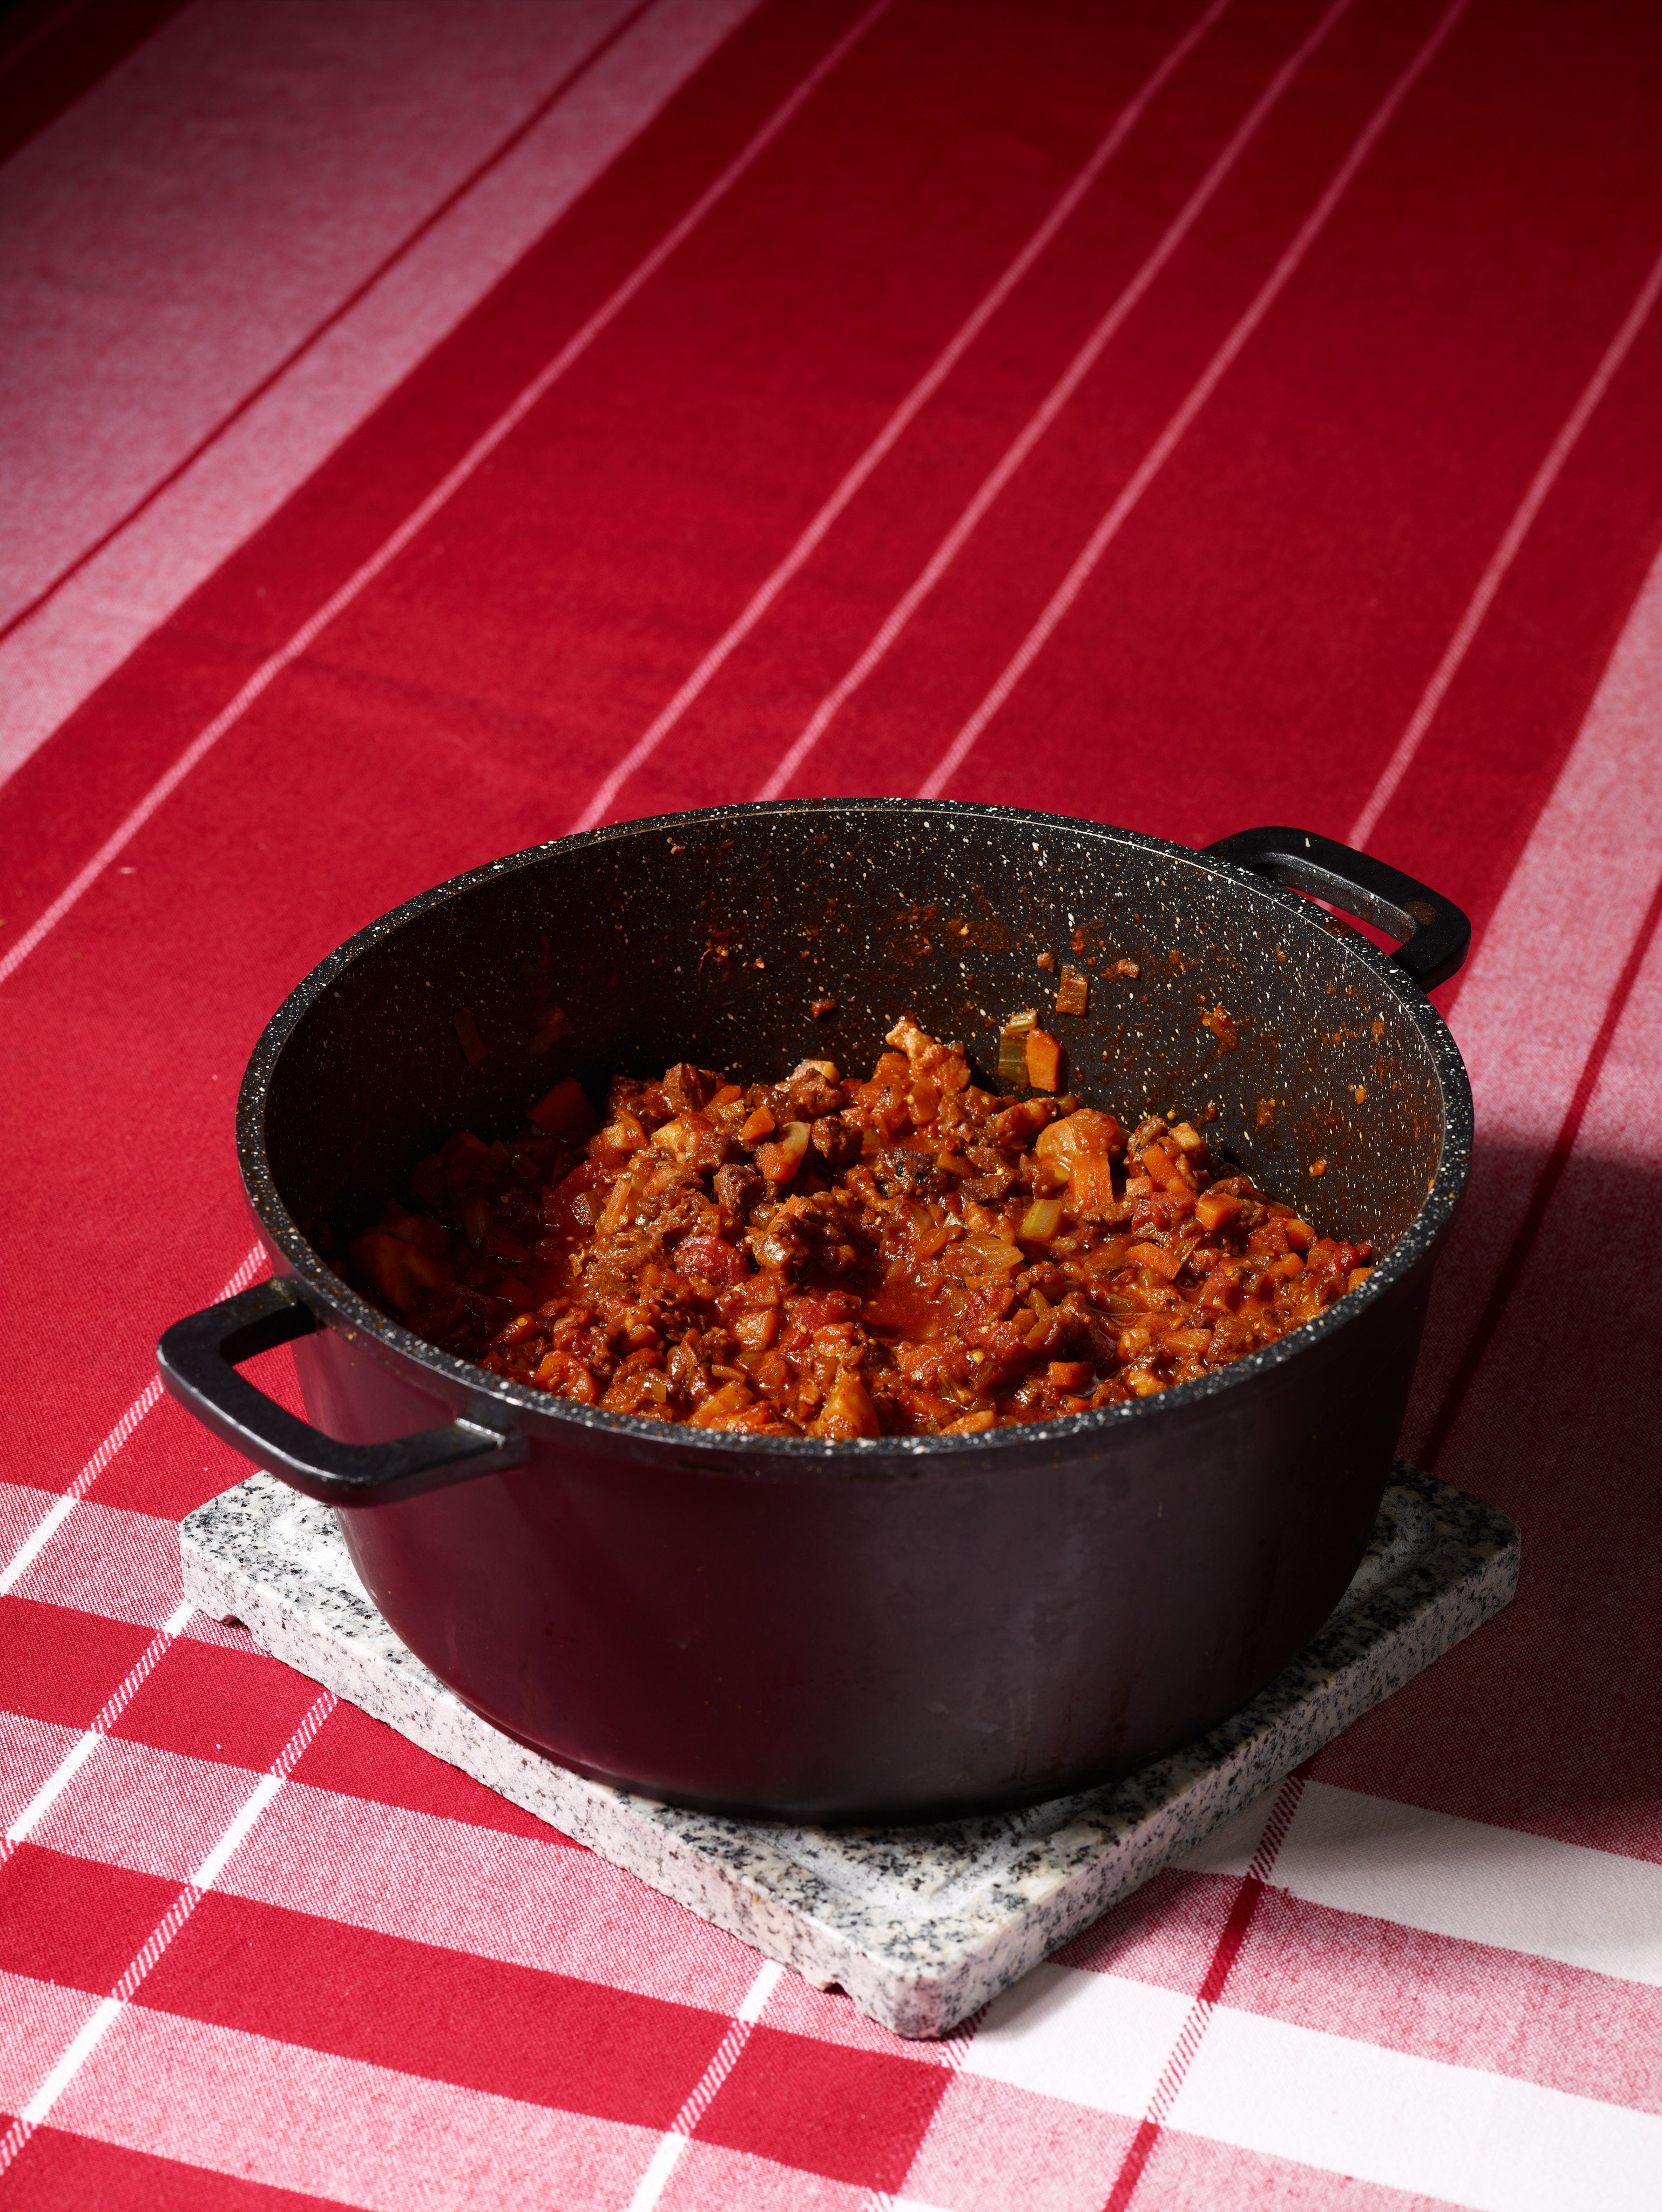 The finished ragù in a heavy pot